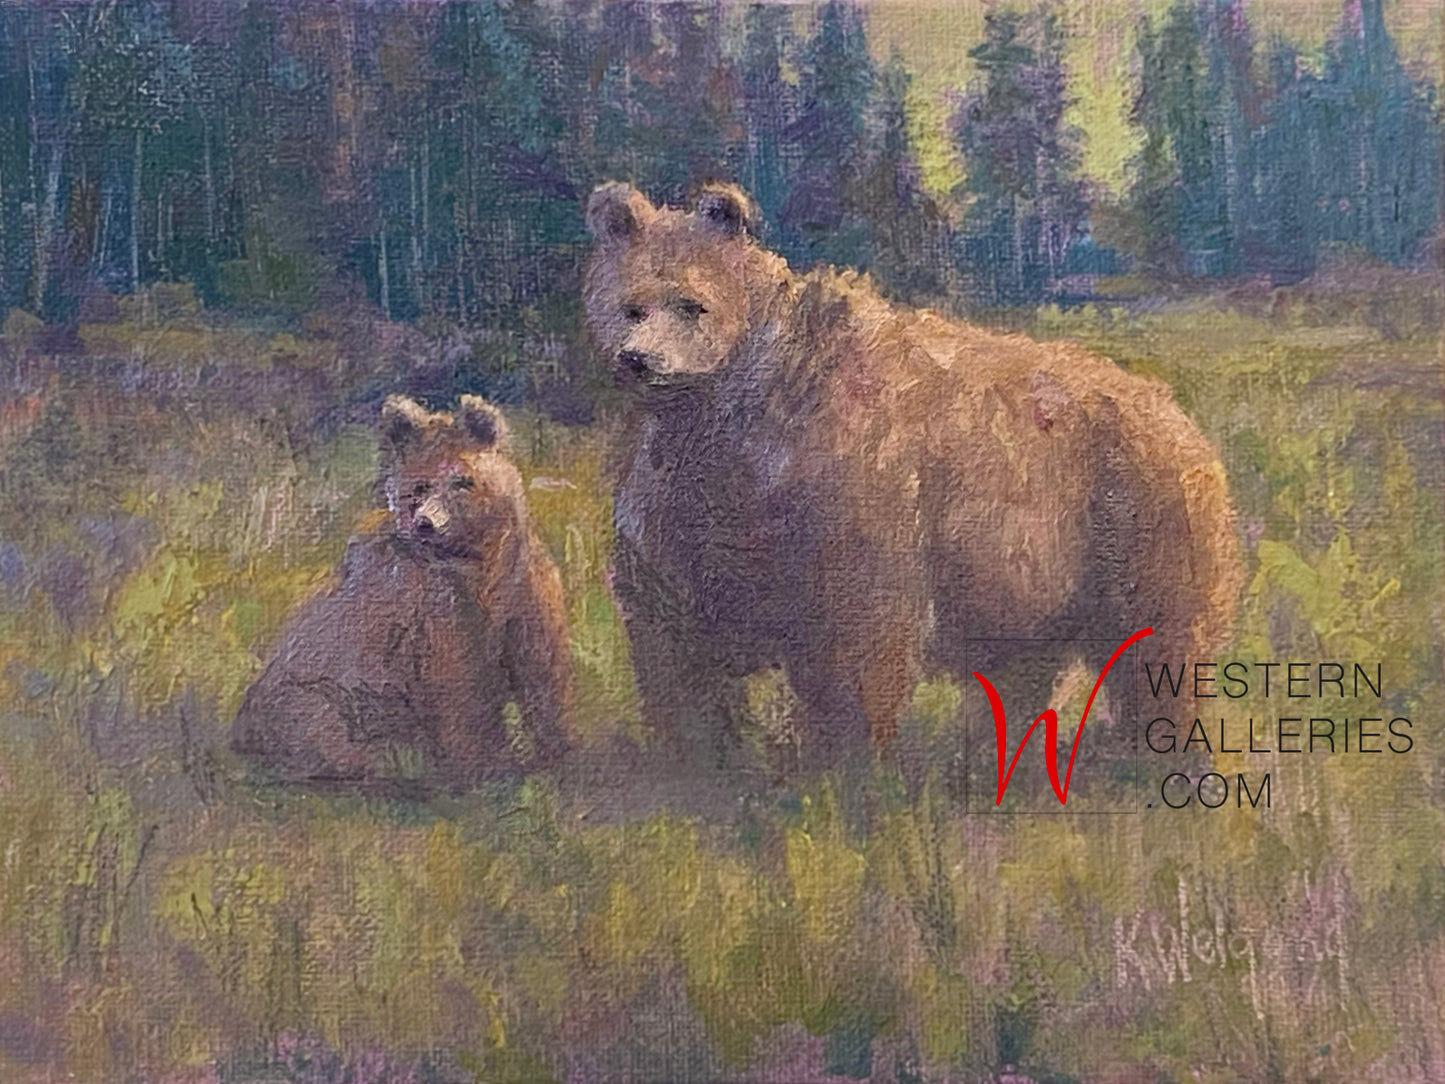 Grizzly Mom and Cub